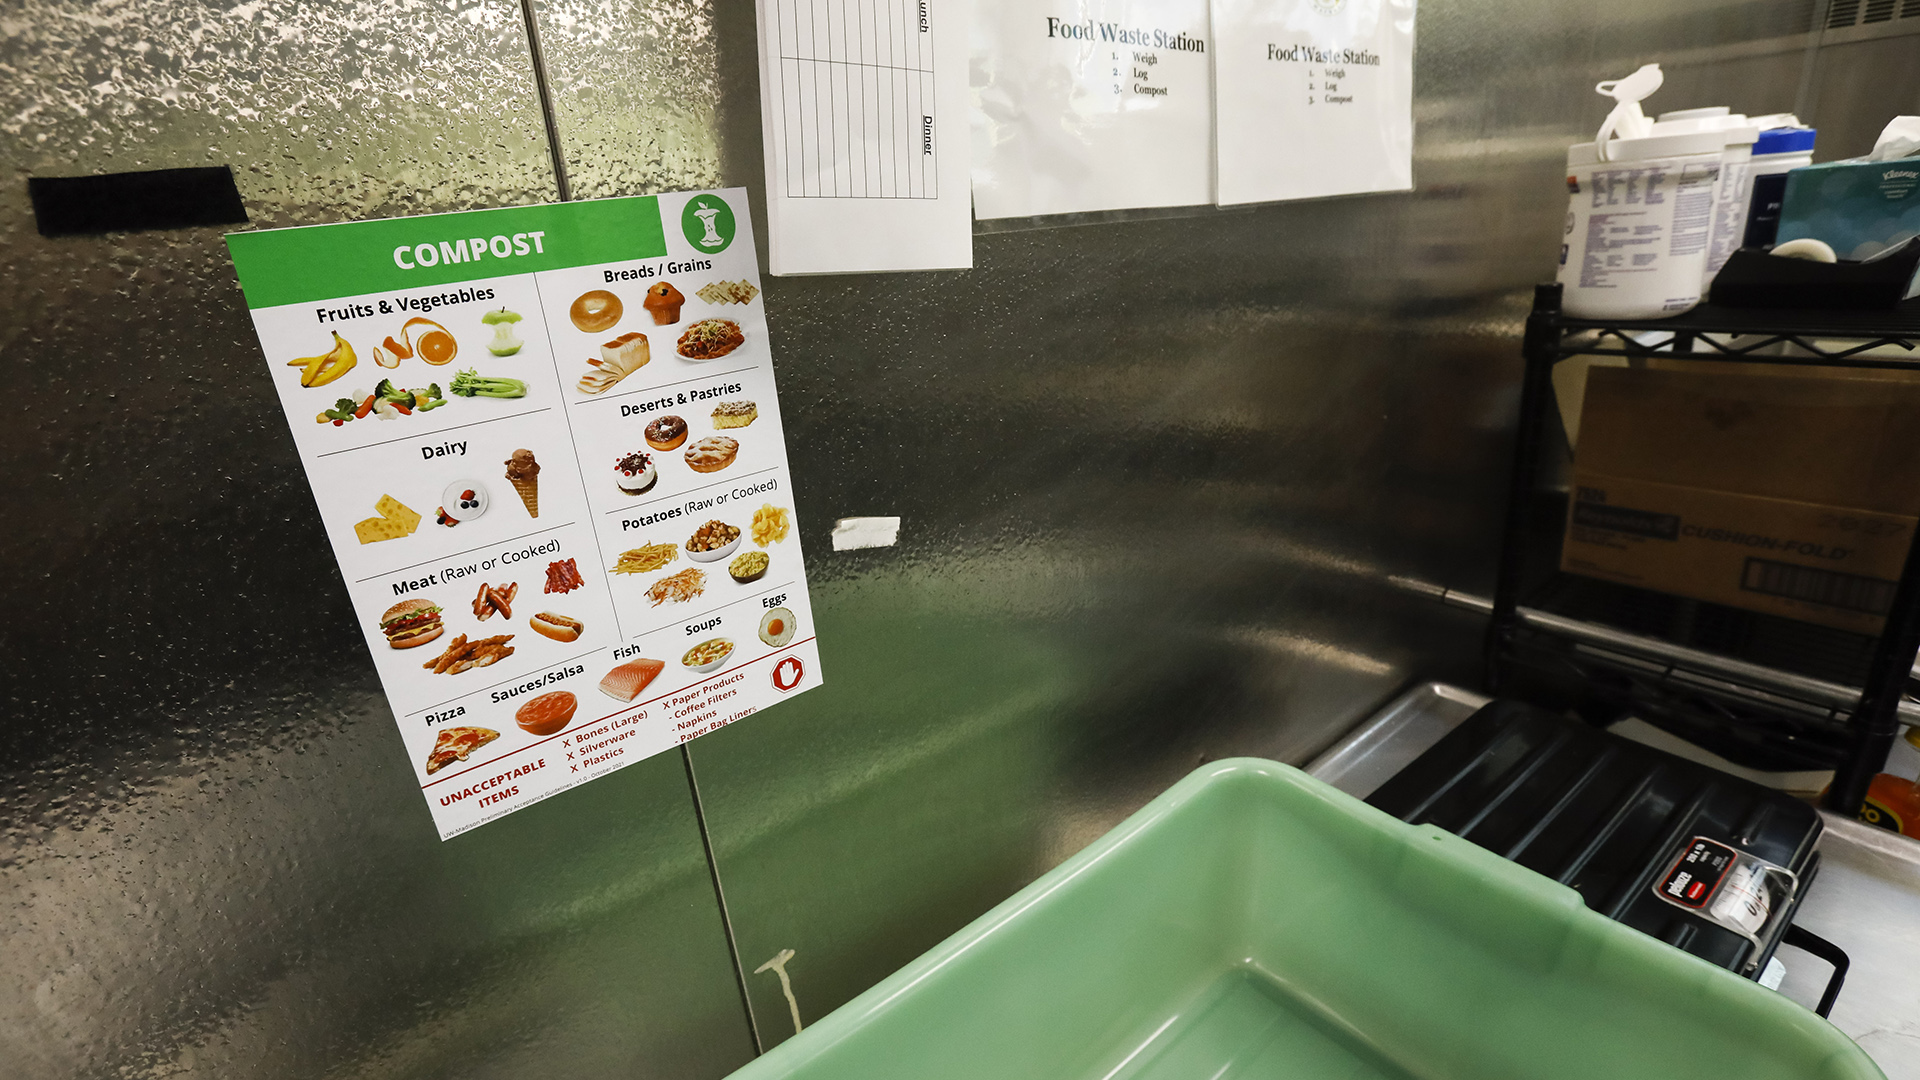 A sign indicating food items that can be composted is attached to a metal wall inside a commercial food preparation space above a plastic tub in an area labeled as a food waste station.